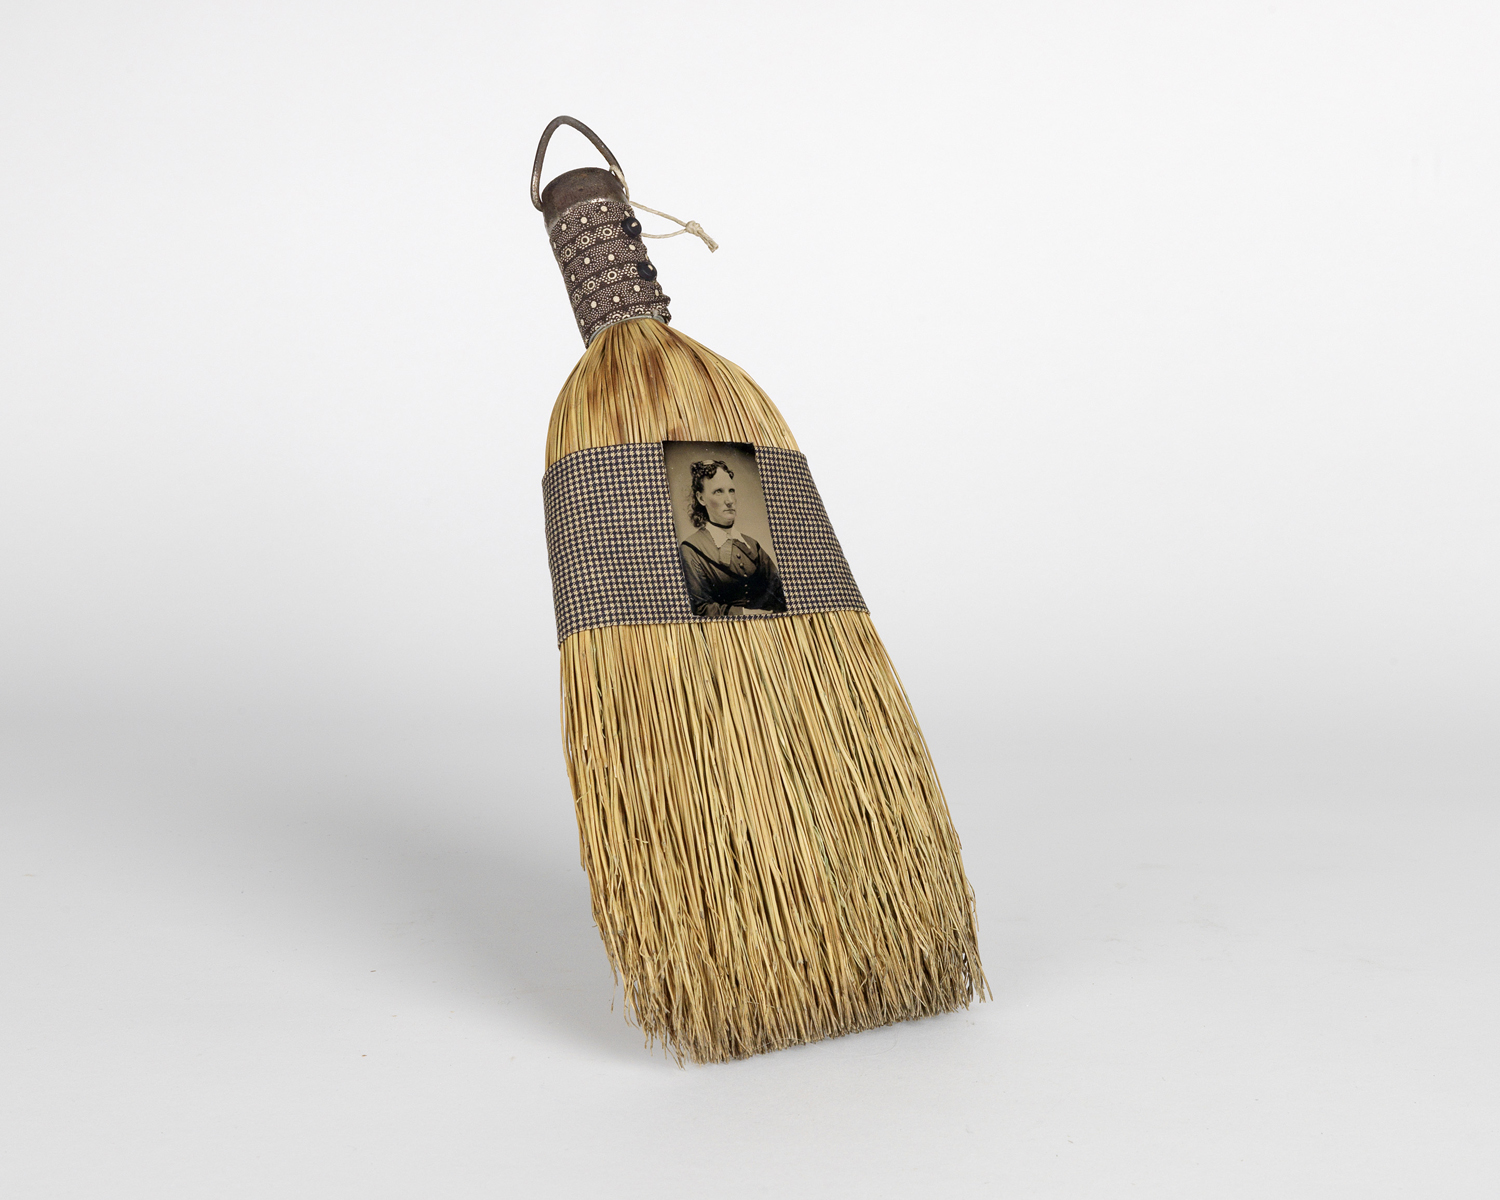    Reworked period broom adorned with a vintage tintype and fabric by artist Elaine Hunstman. 1880s-1990s   